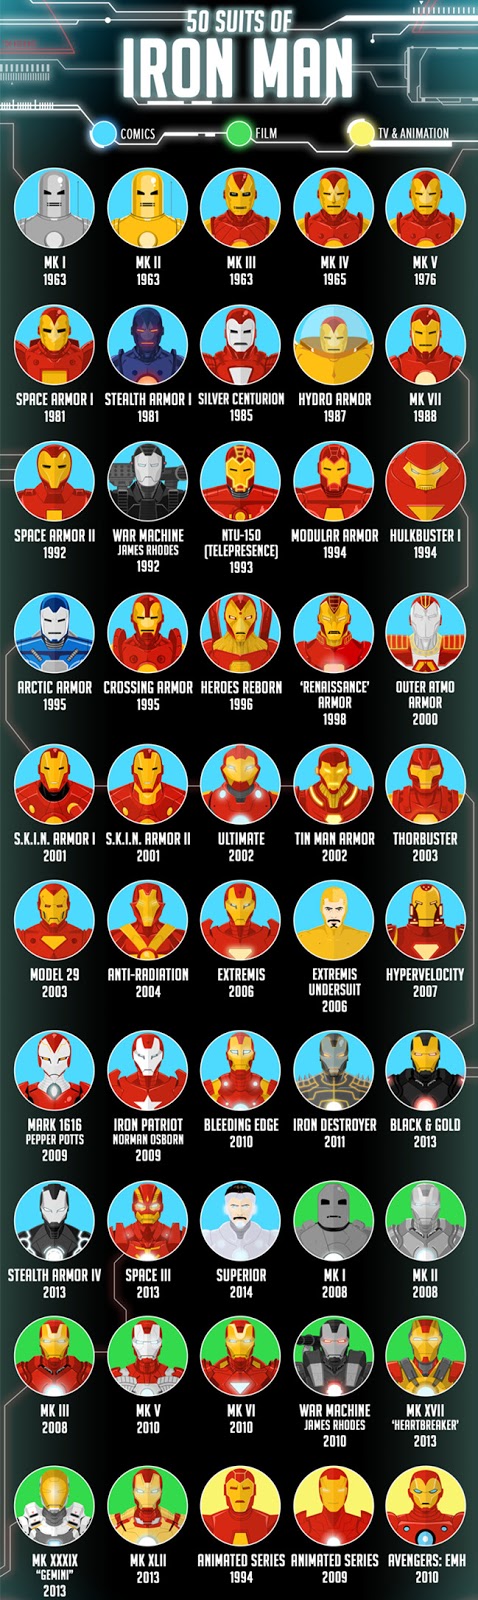 50 Suits of Ironman